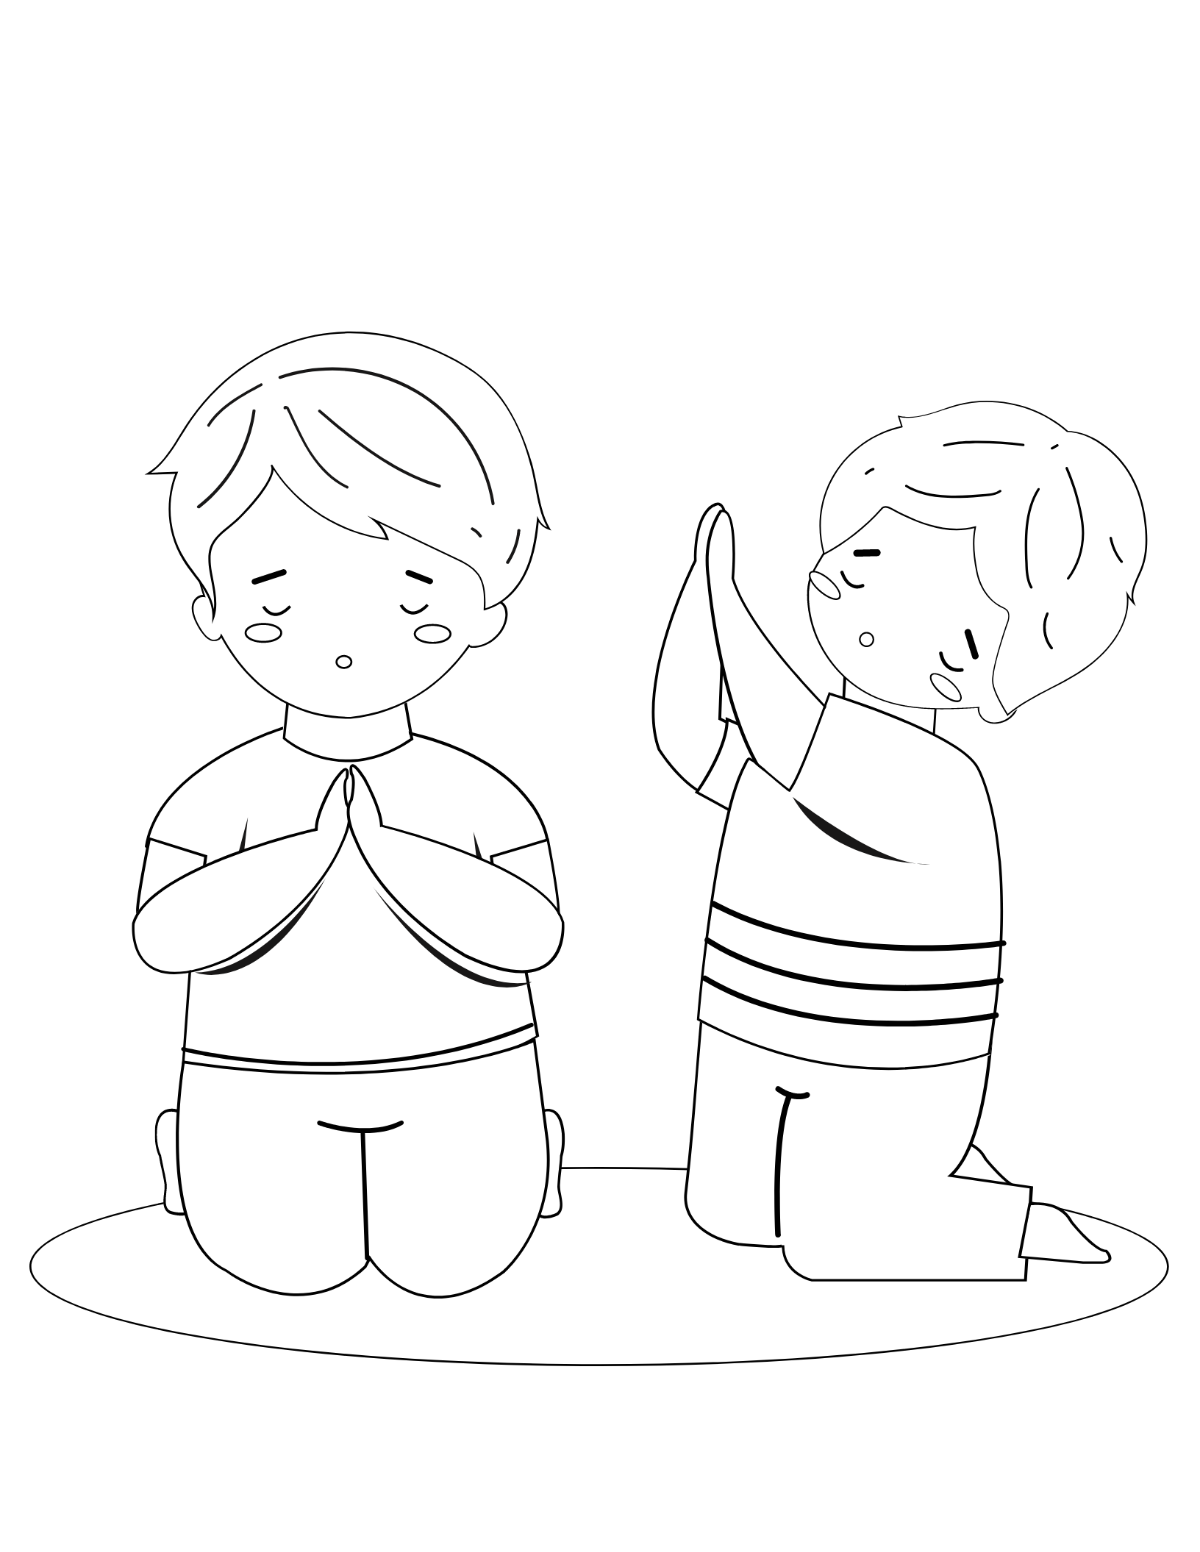 National Day Of Prayer Coloring Page For Kids Template